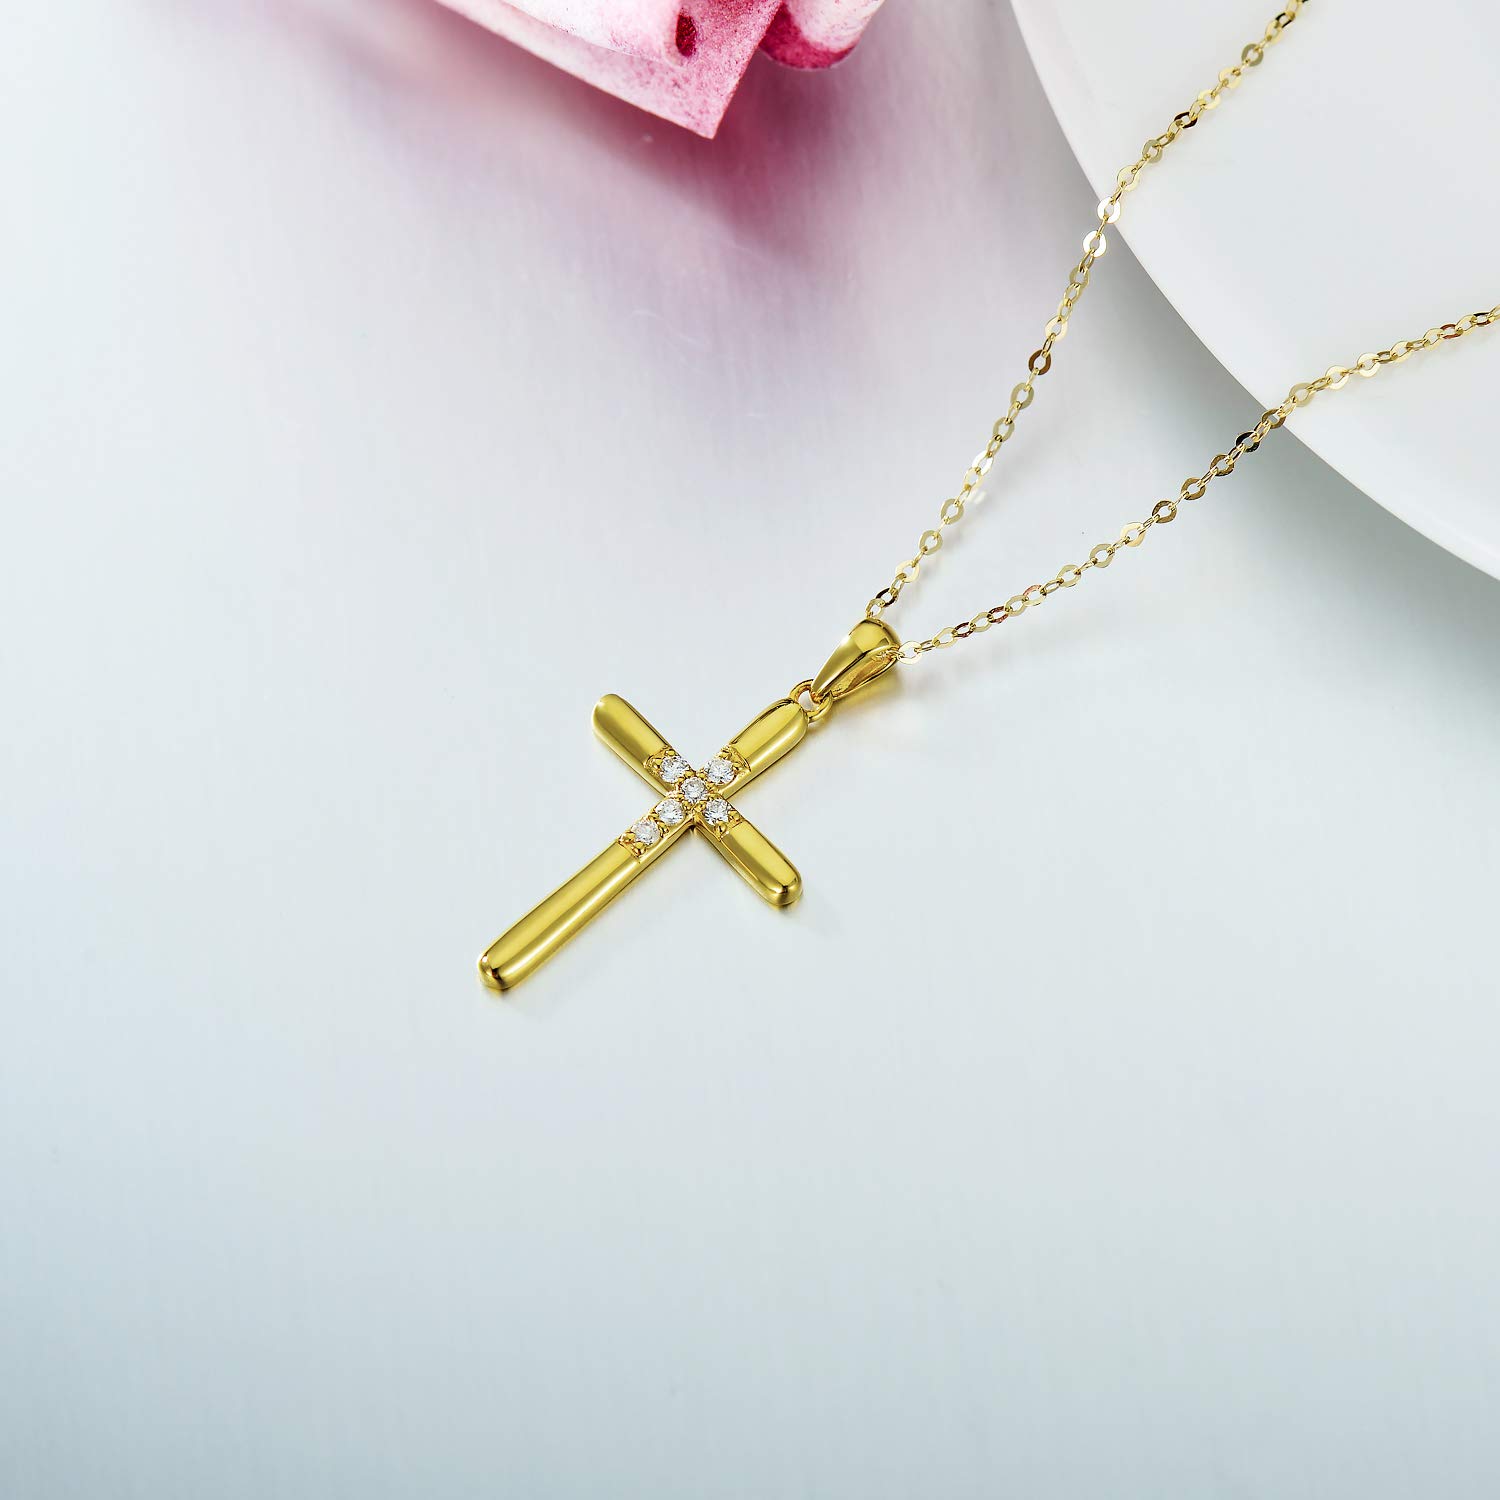 14K Solid Gold Diamond Cross Necklace for Women, 0.09 Carat (ctw) Natural Diamonds Real Gold Blessing Cross Pendant Necklace Religious Jewelry Gift for Her, 18 inch